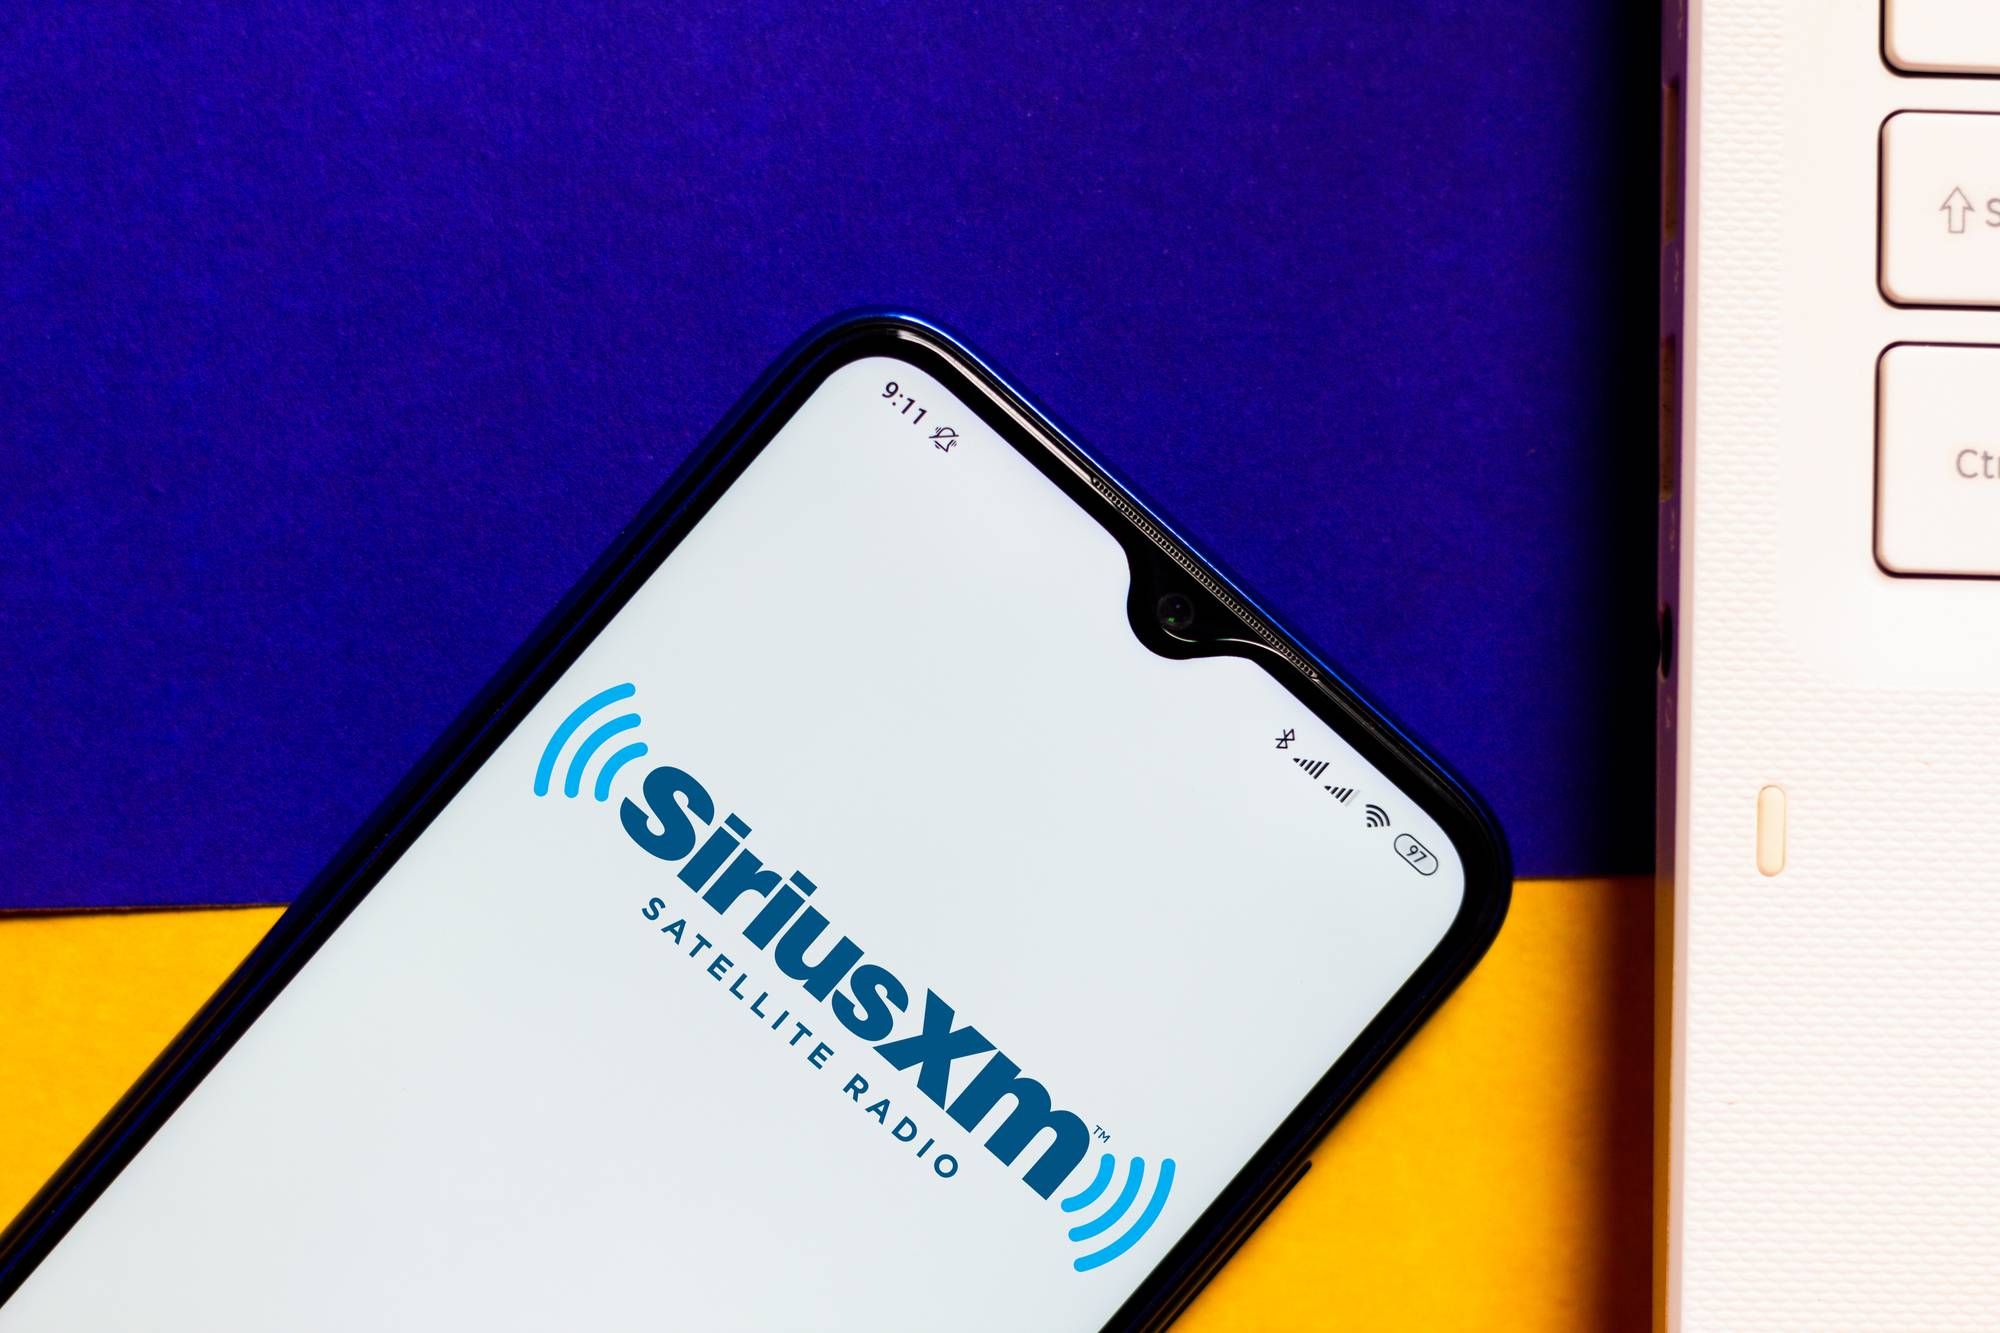 SiriusXM recently agreed to pay $96 million to resolve subscription claims against them.